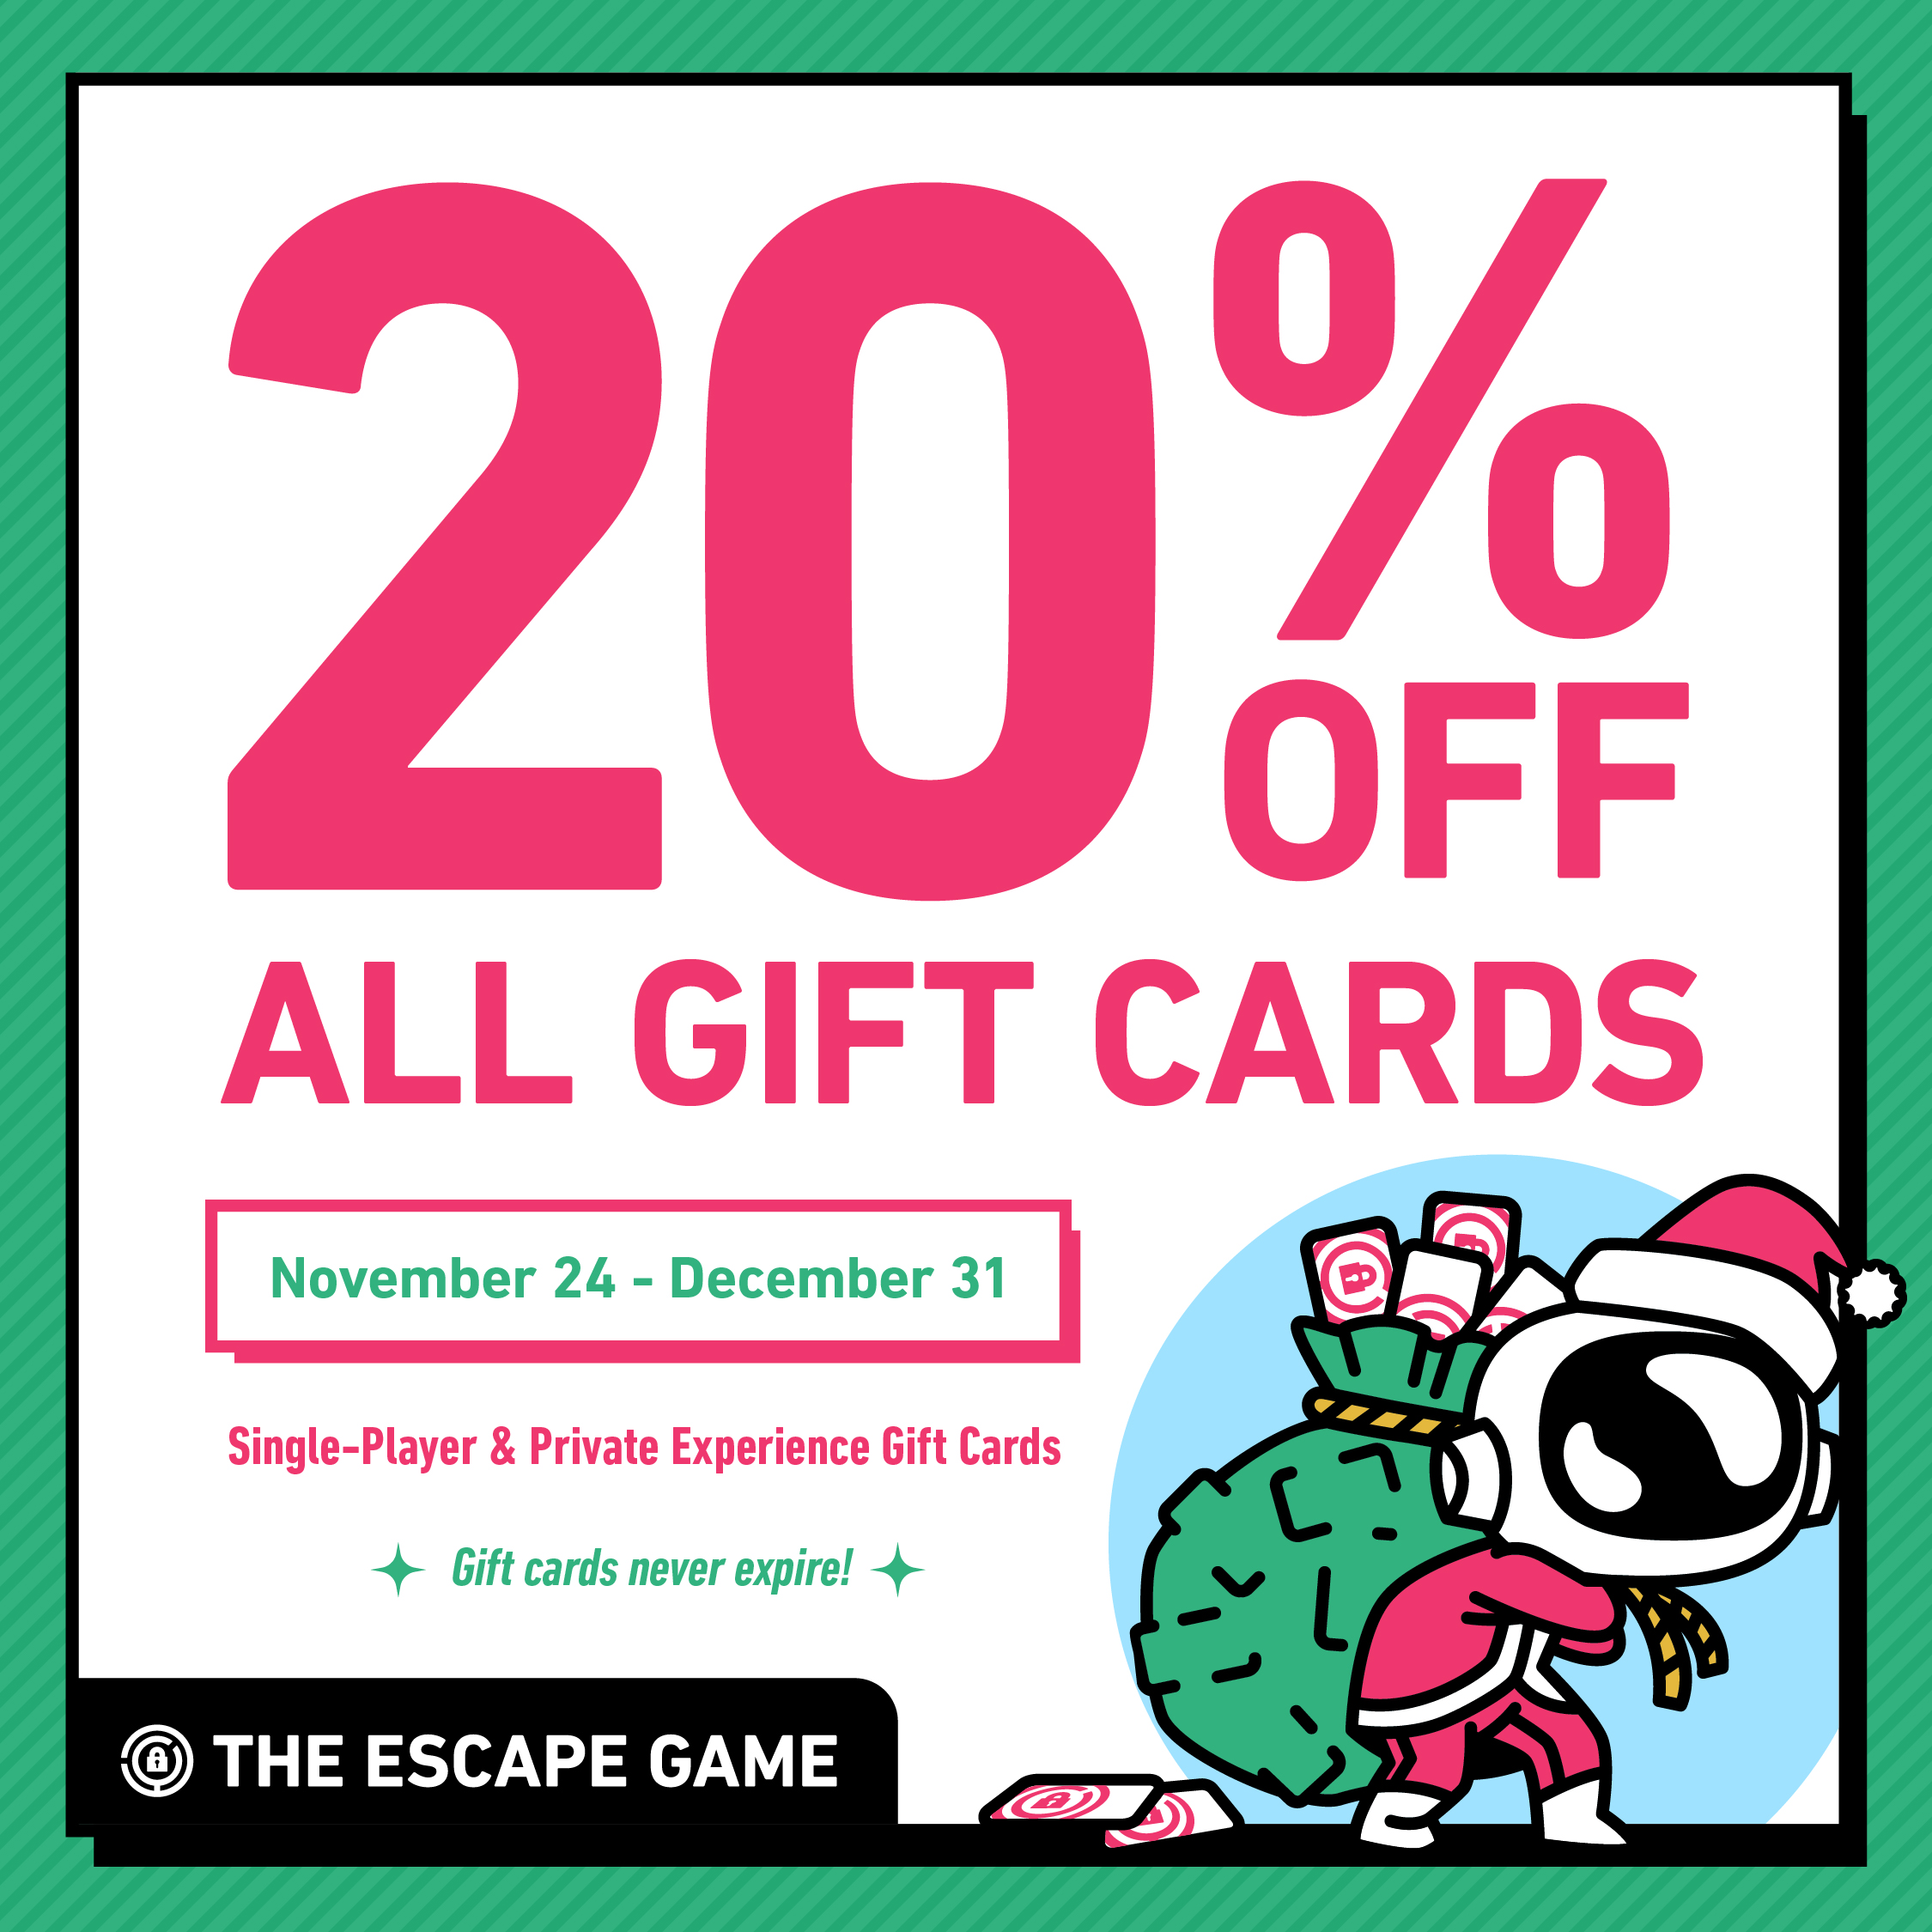 20% off all gift cards from The Escape Game